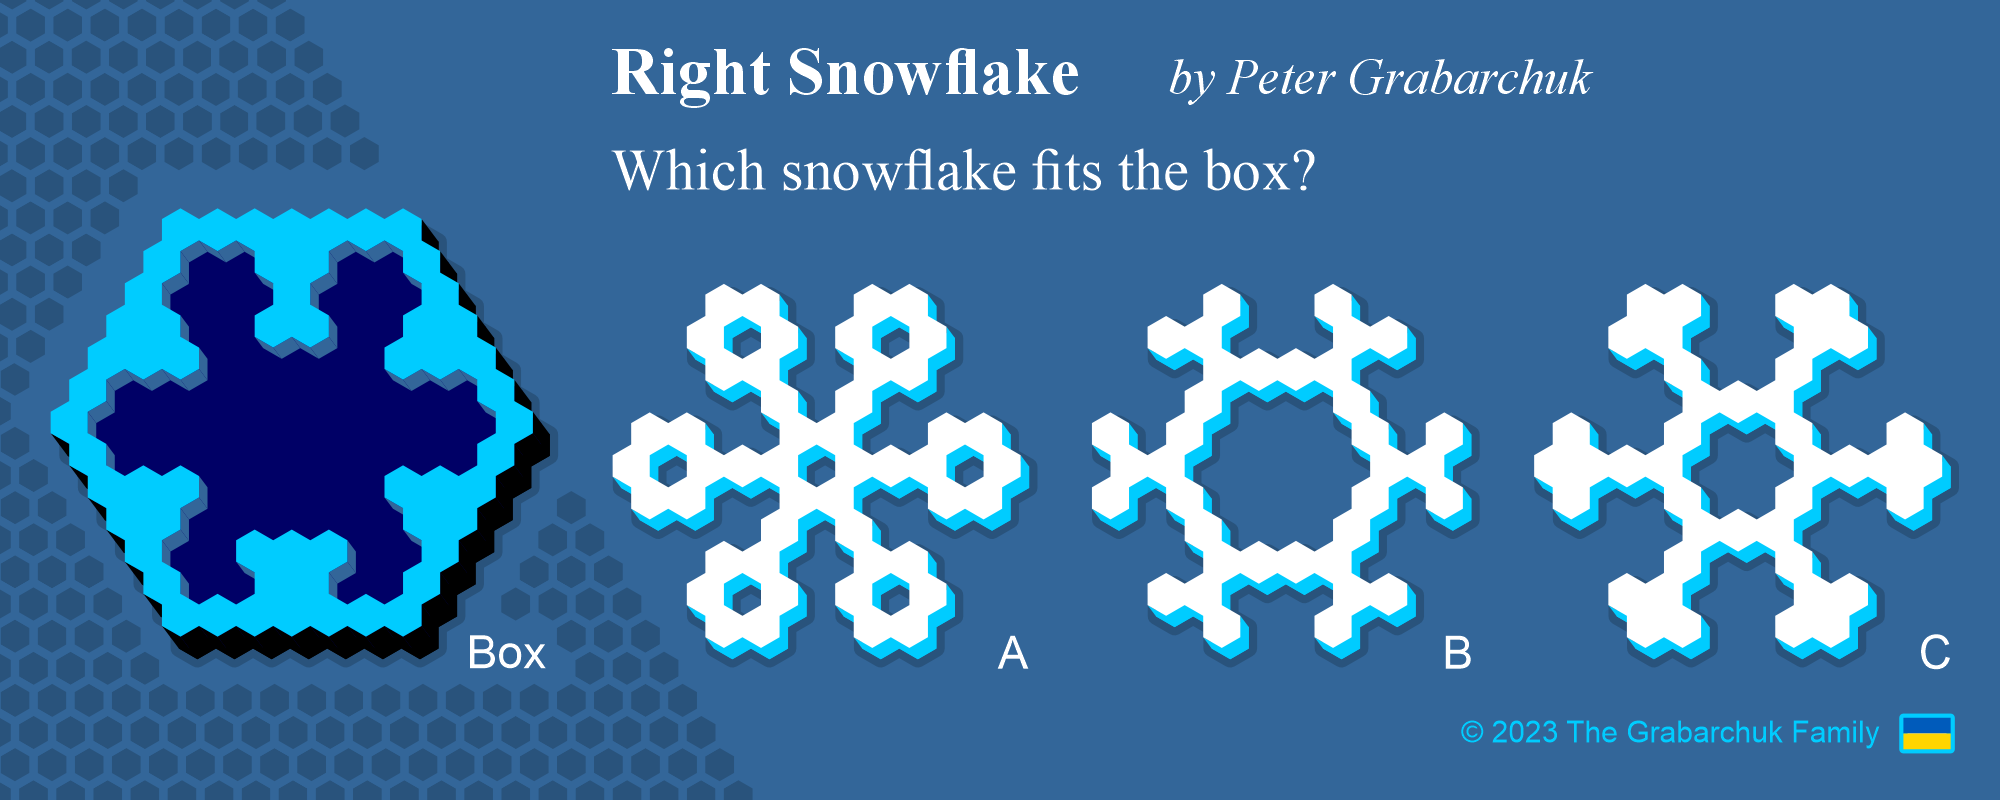 Right Snowflake by Peter Grabarchuk